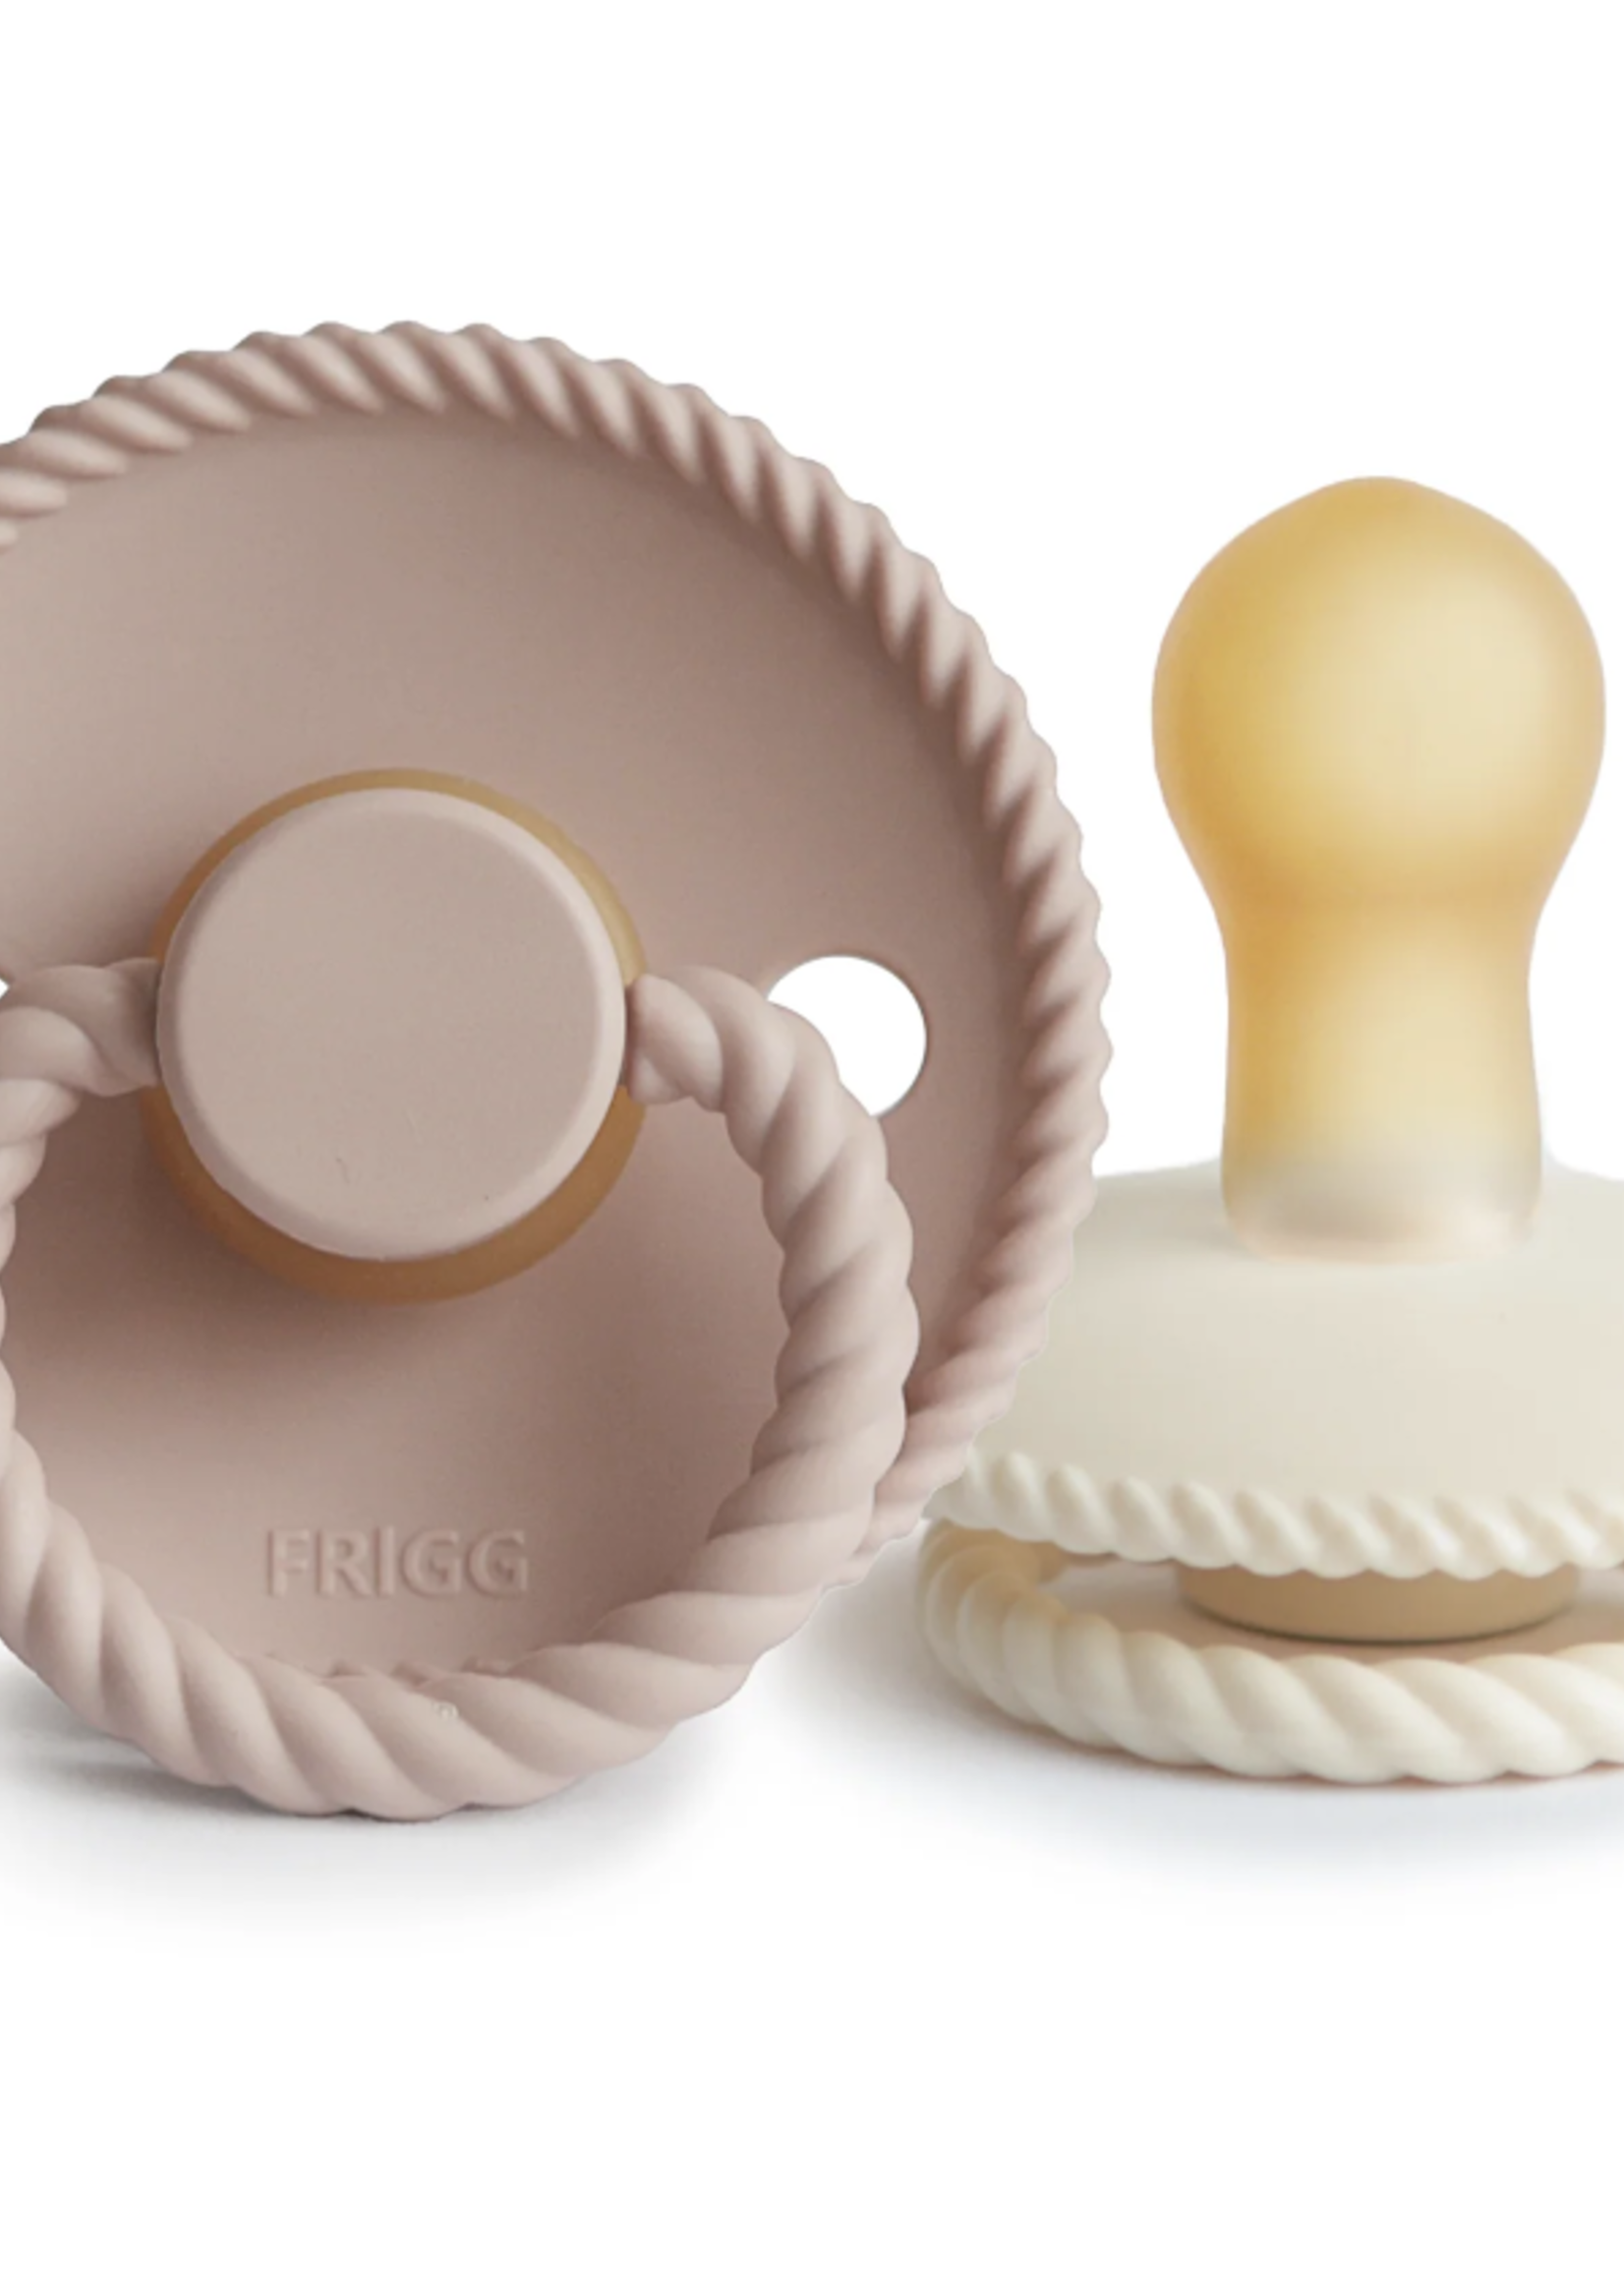 Elitaire Petite FRIGG Rope Natural Rubber Baby Pacifier Set (Blush/Cream)